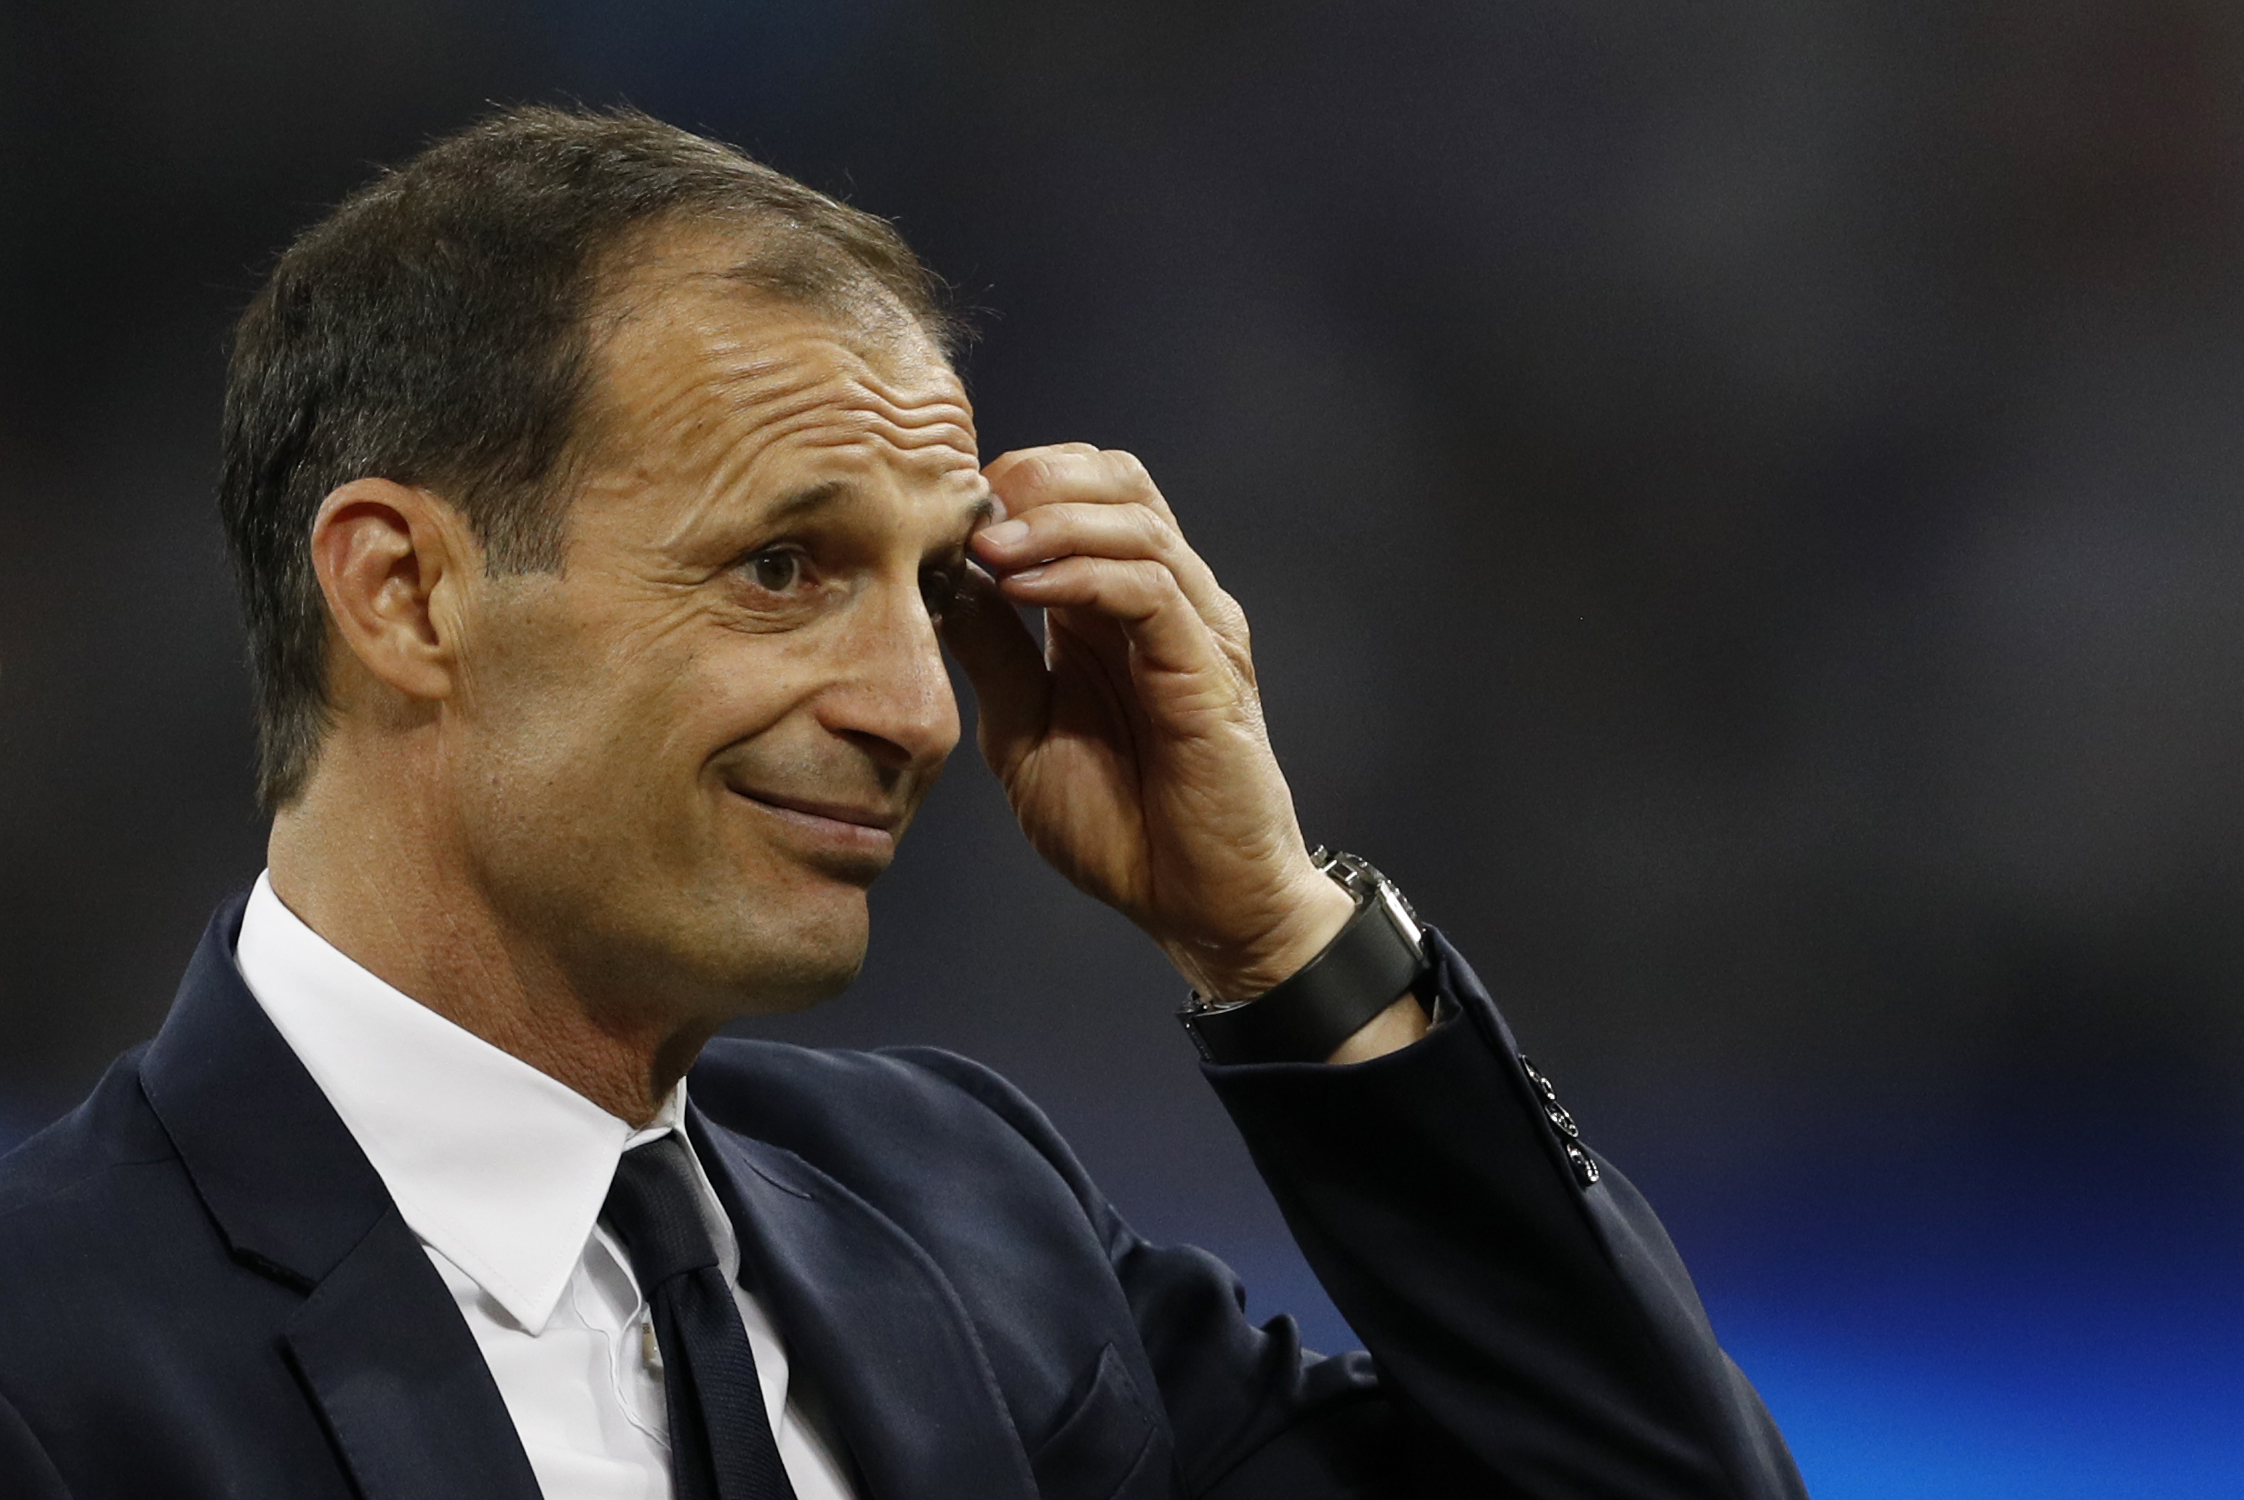 Britain Soccer Football - Juventus v Real Madrid - UEFA Champions League Final - The National Stadium of Wales, Cardiff - June 3, 2017 Juventus coach Massimiliano Allegri after the match Reuters / John Sibley Livepic